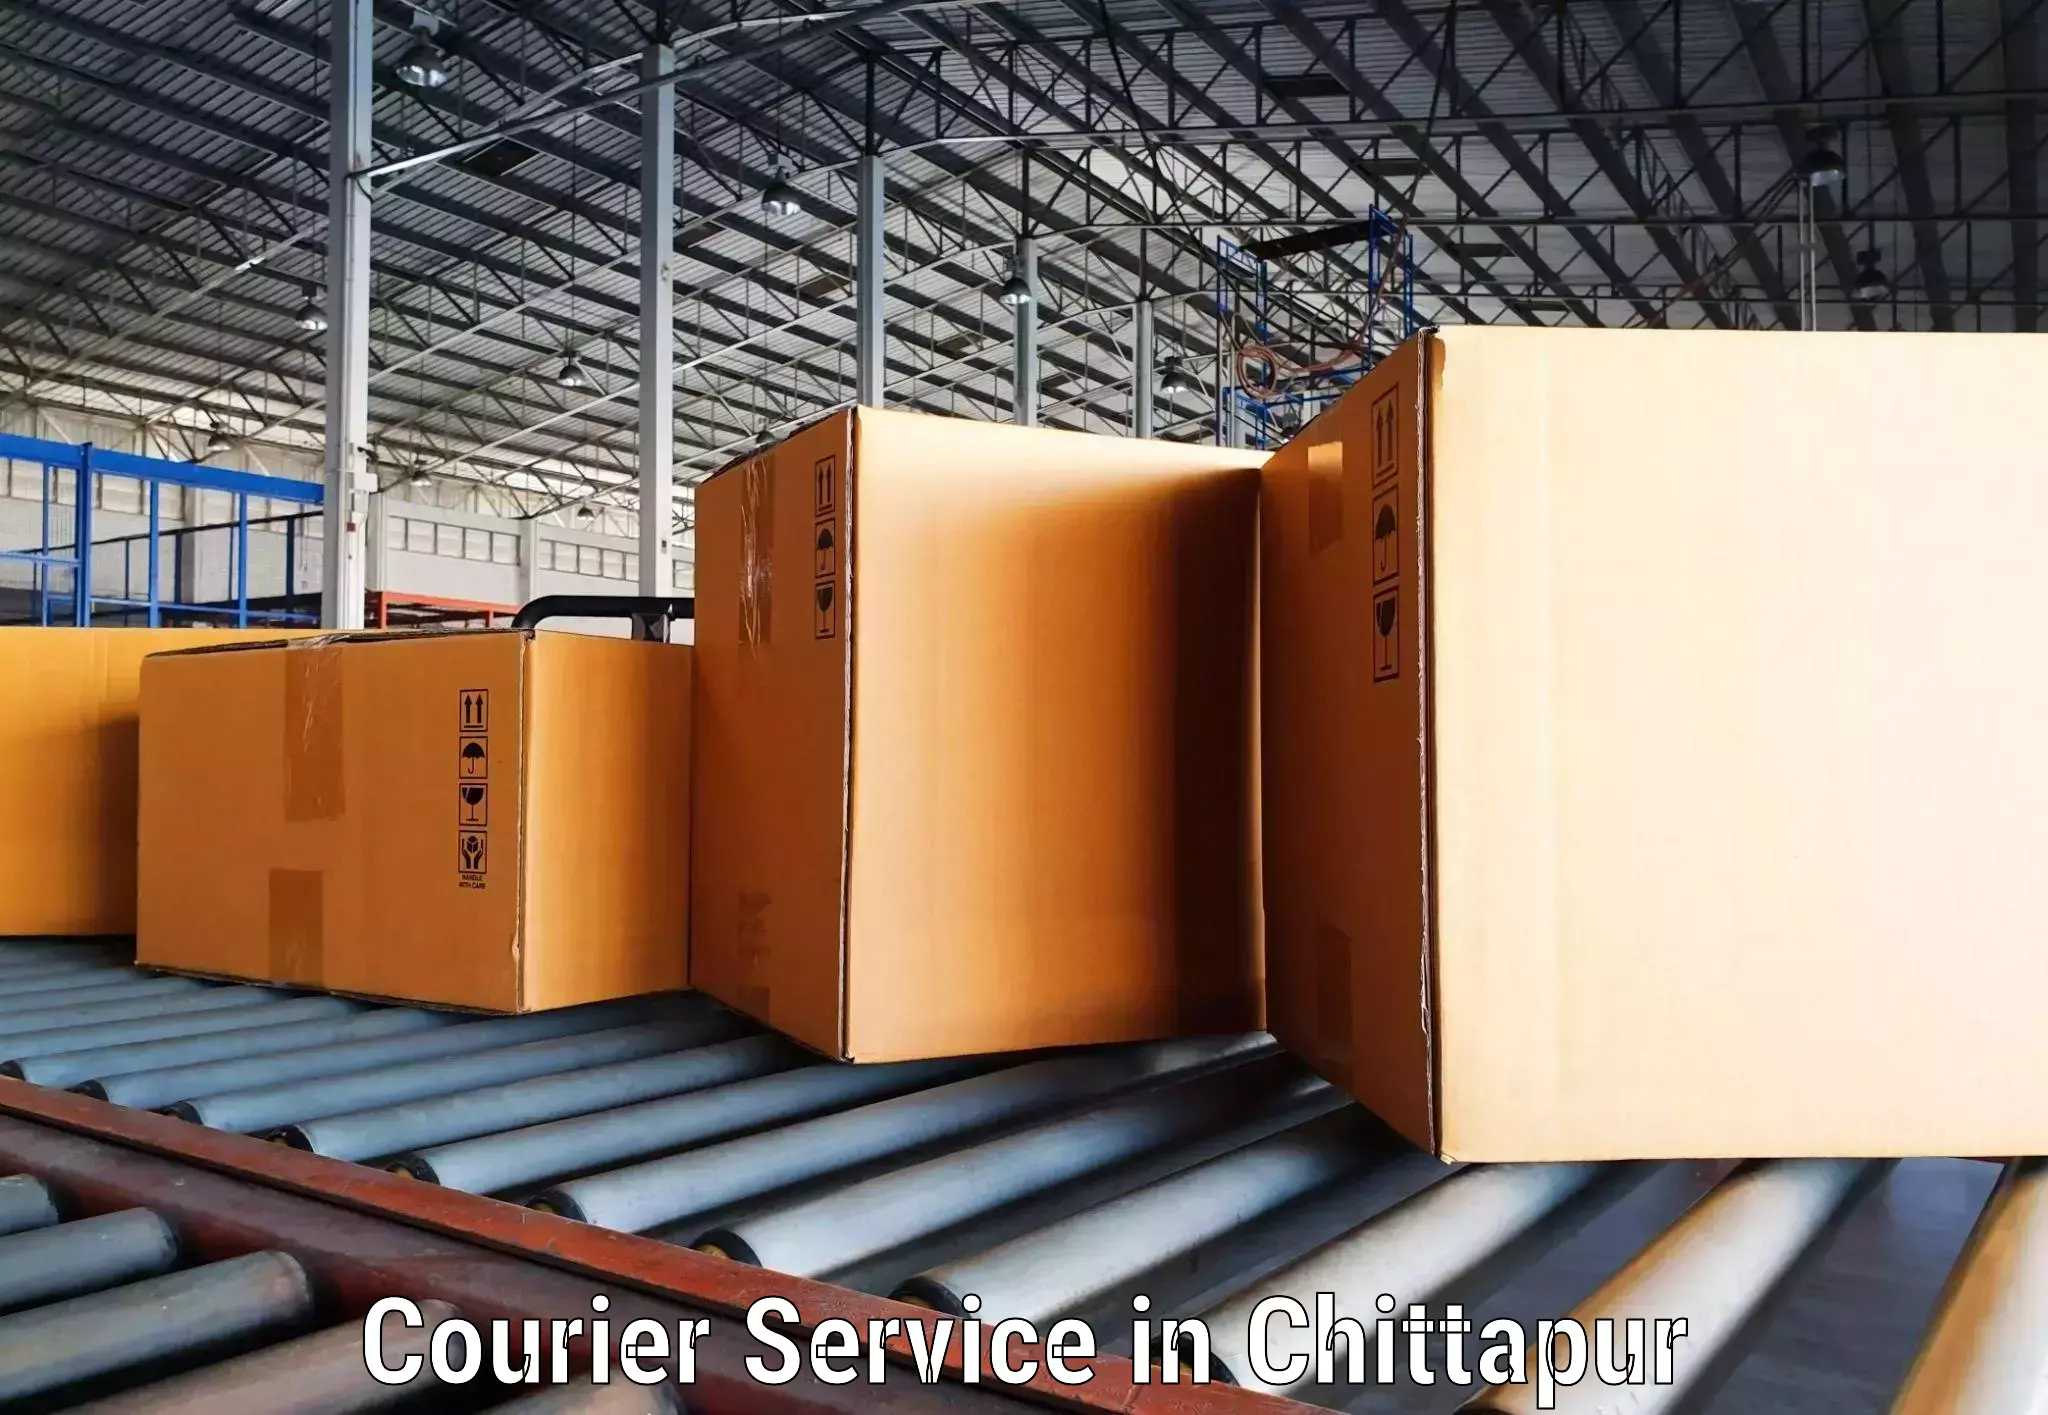 Multi-carrier shipping in Chittapur